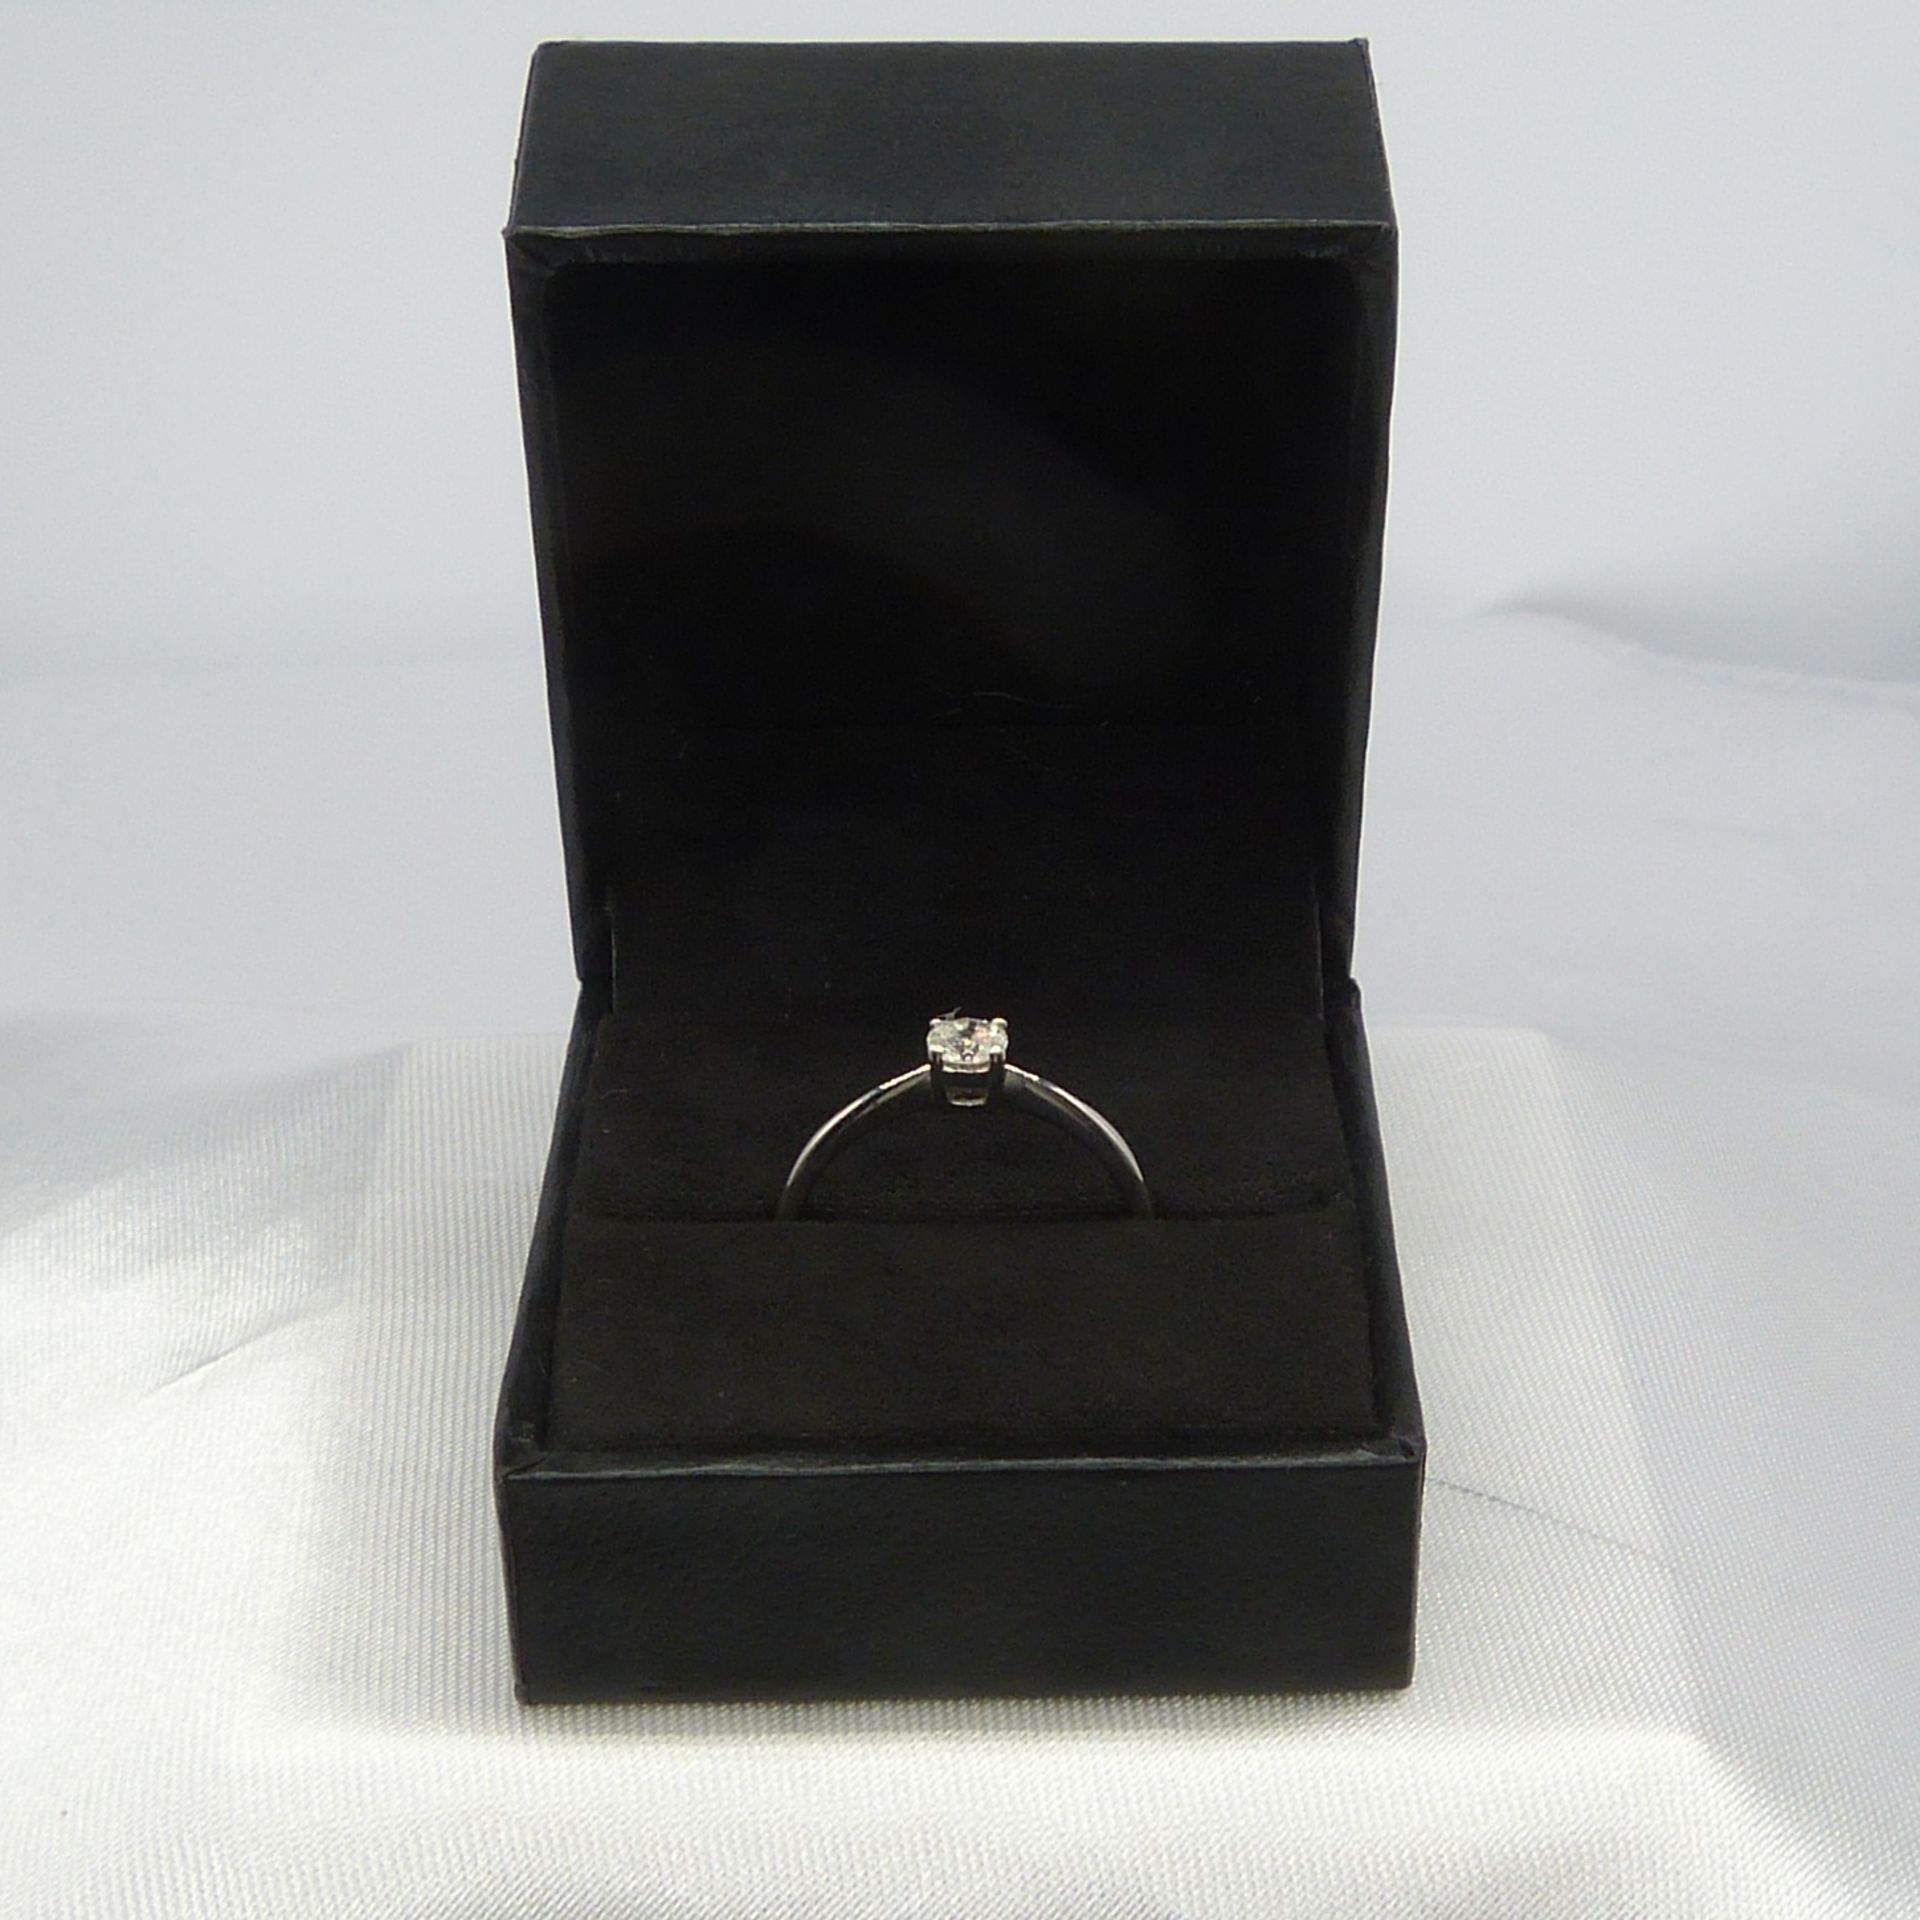 9ct White Gold 0.25 Carat Diamond Solitaire Ring, Boxed - Image 6 of 6